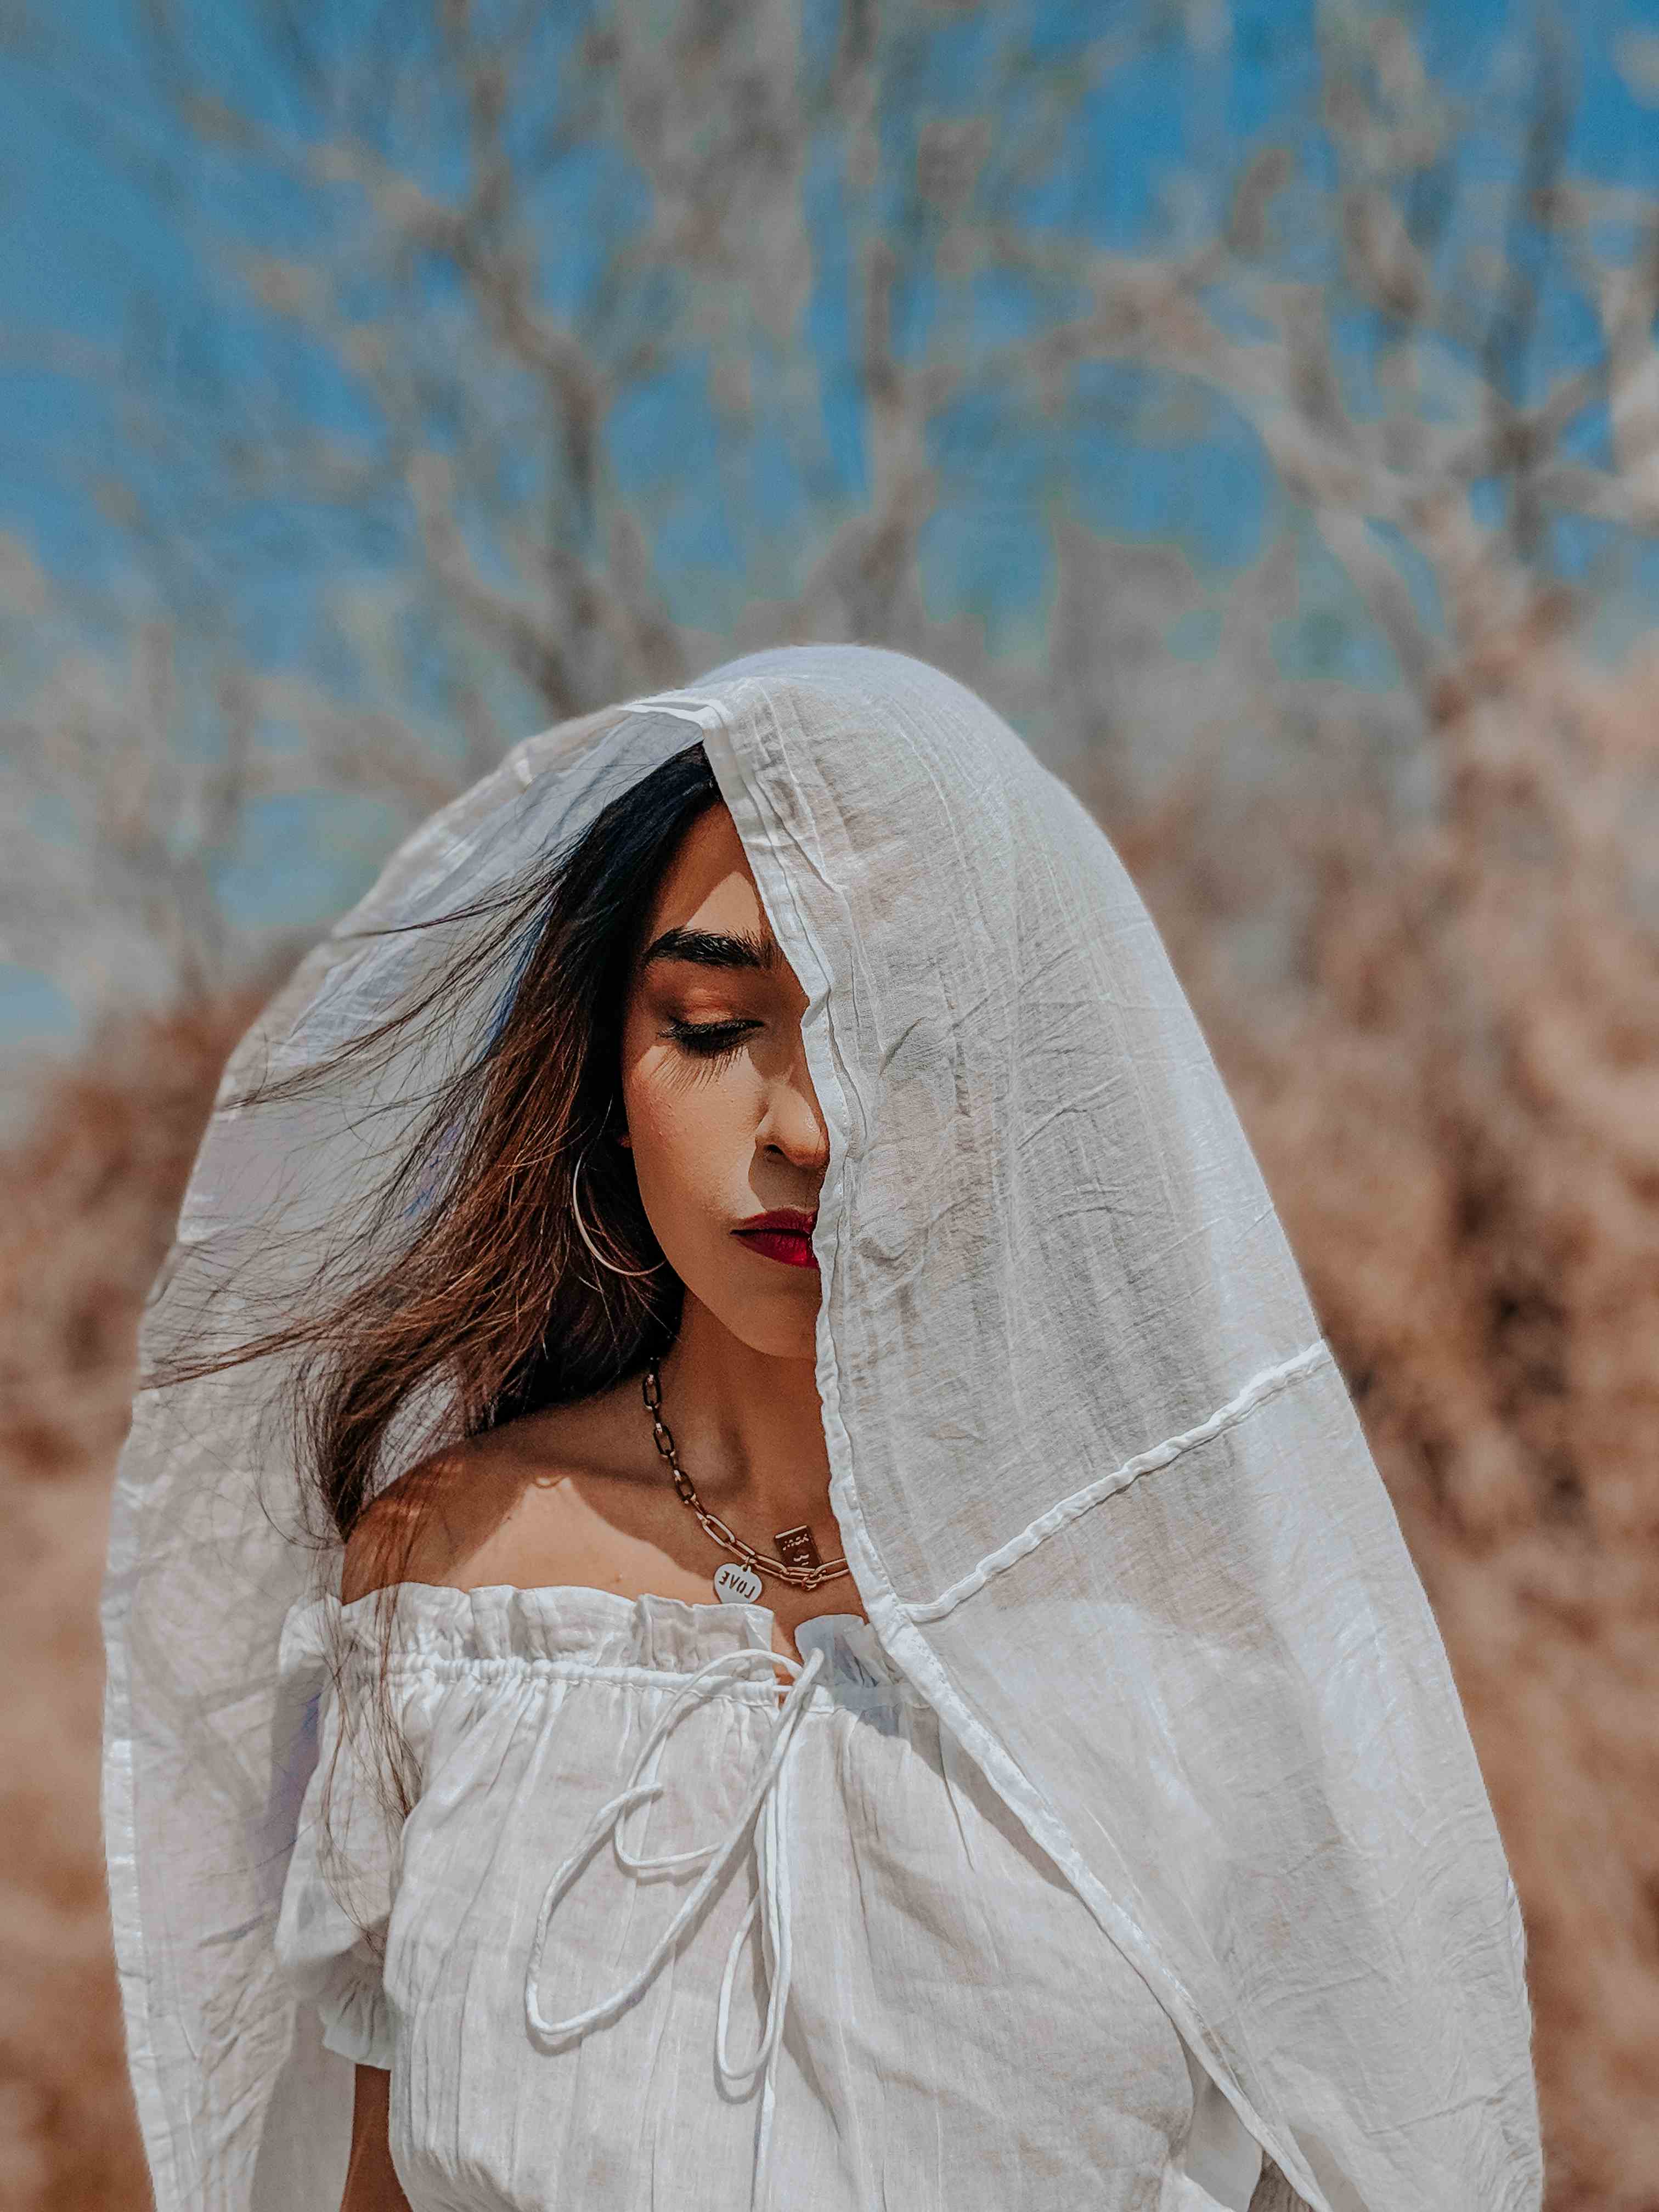 Outdoor editorial fashion shoot with girl in white dress & veil